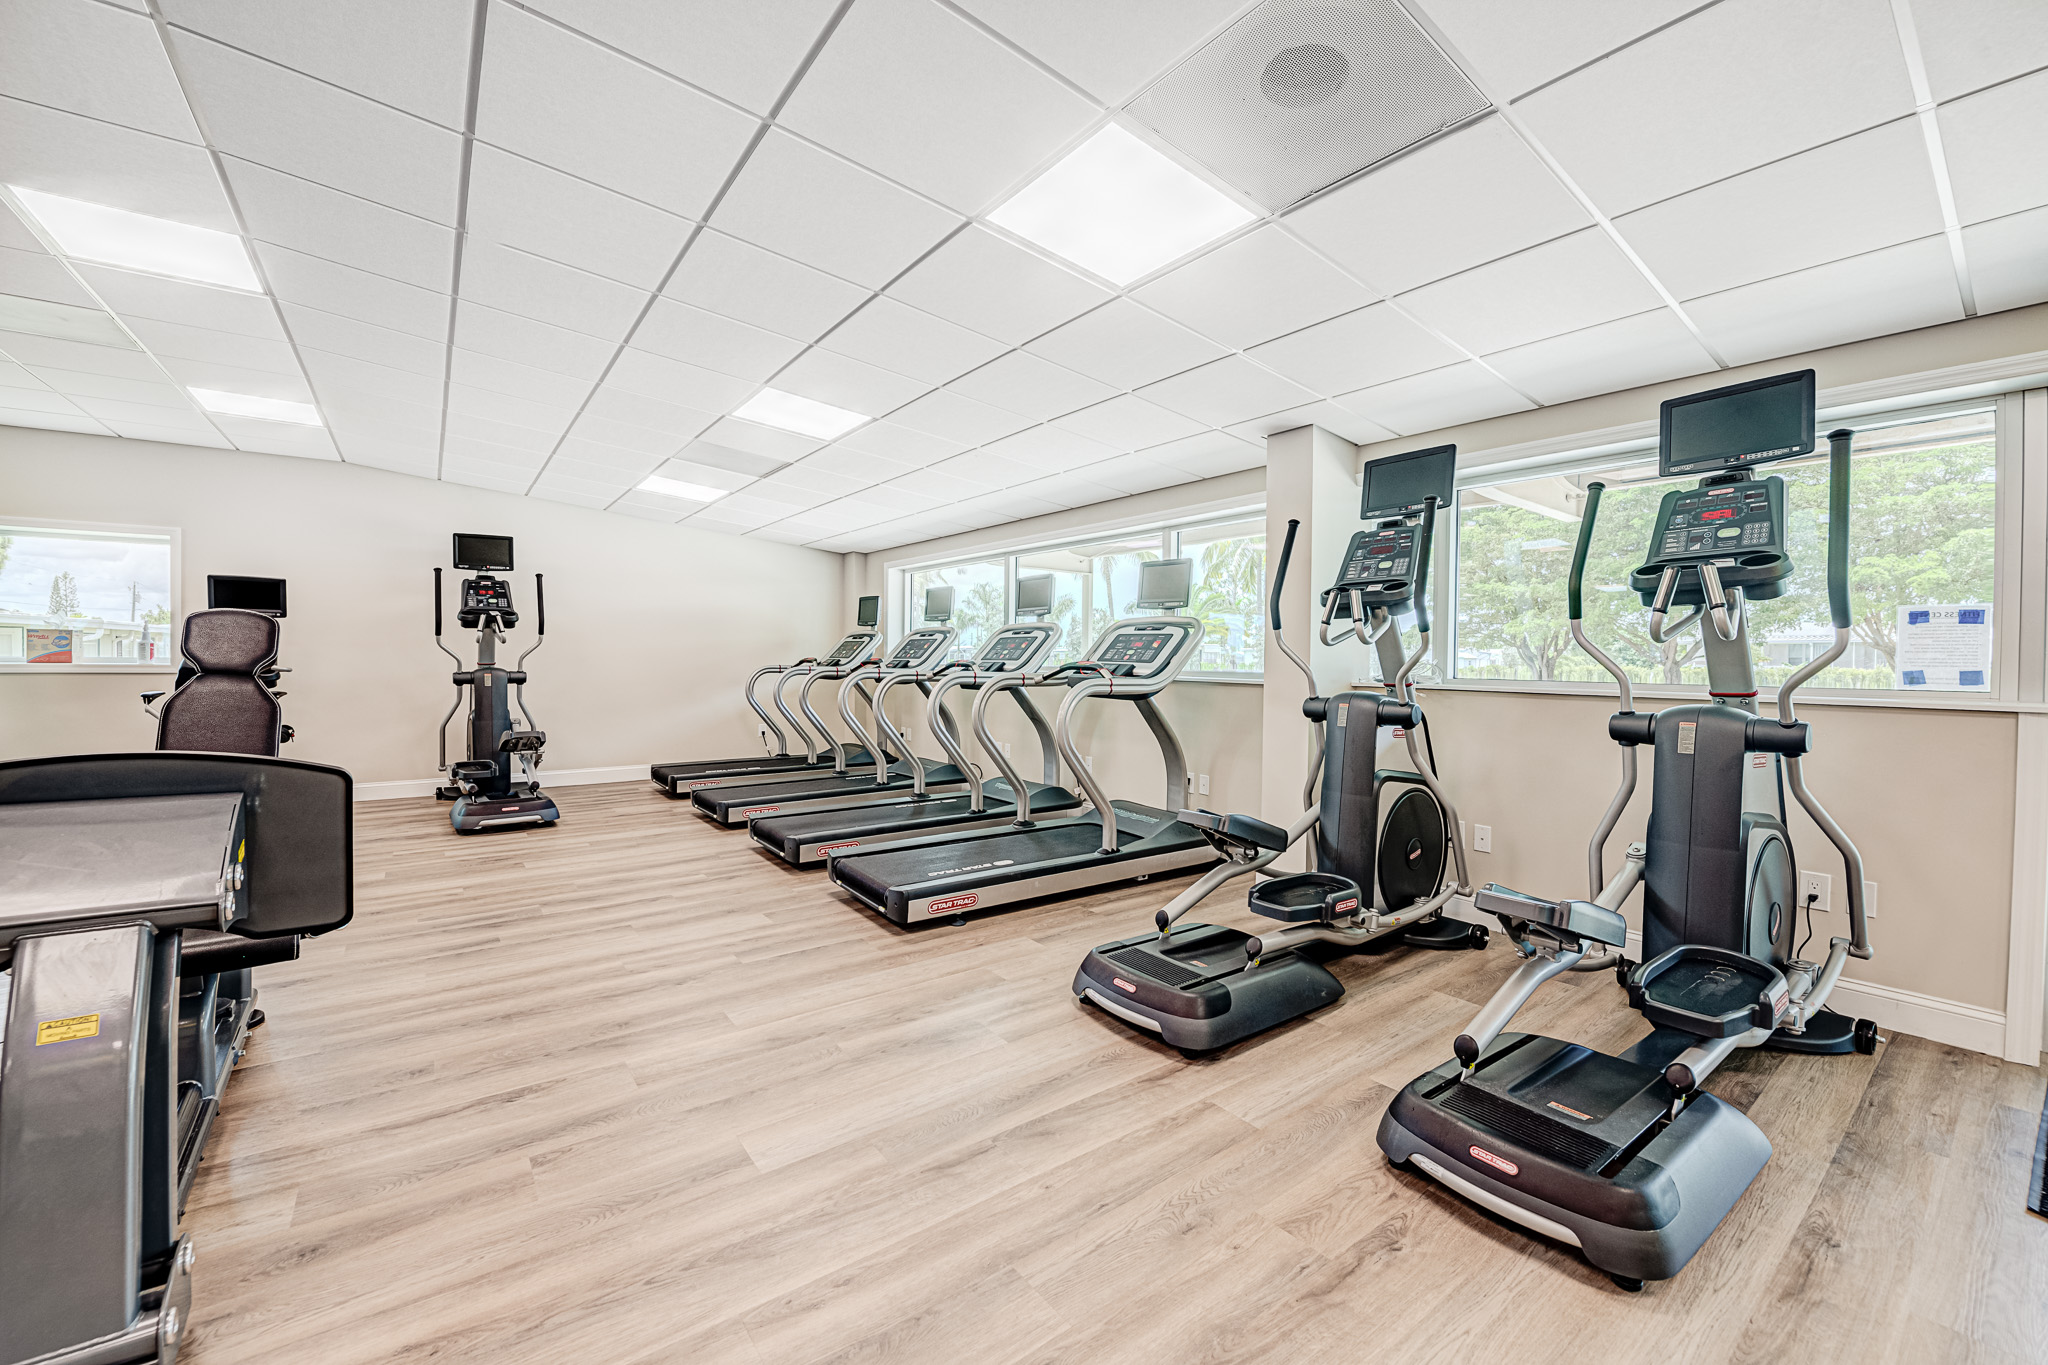 Treadmills and other cardio exercise machines on the wooden floors of Bonita Terra's Fitness Room